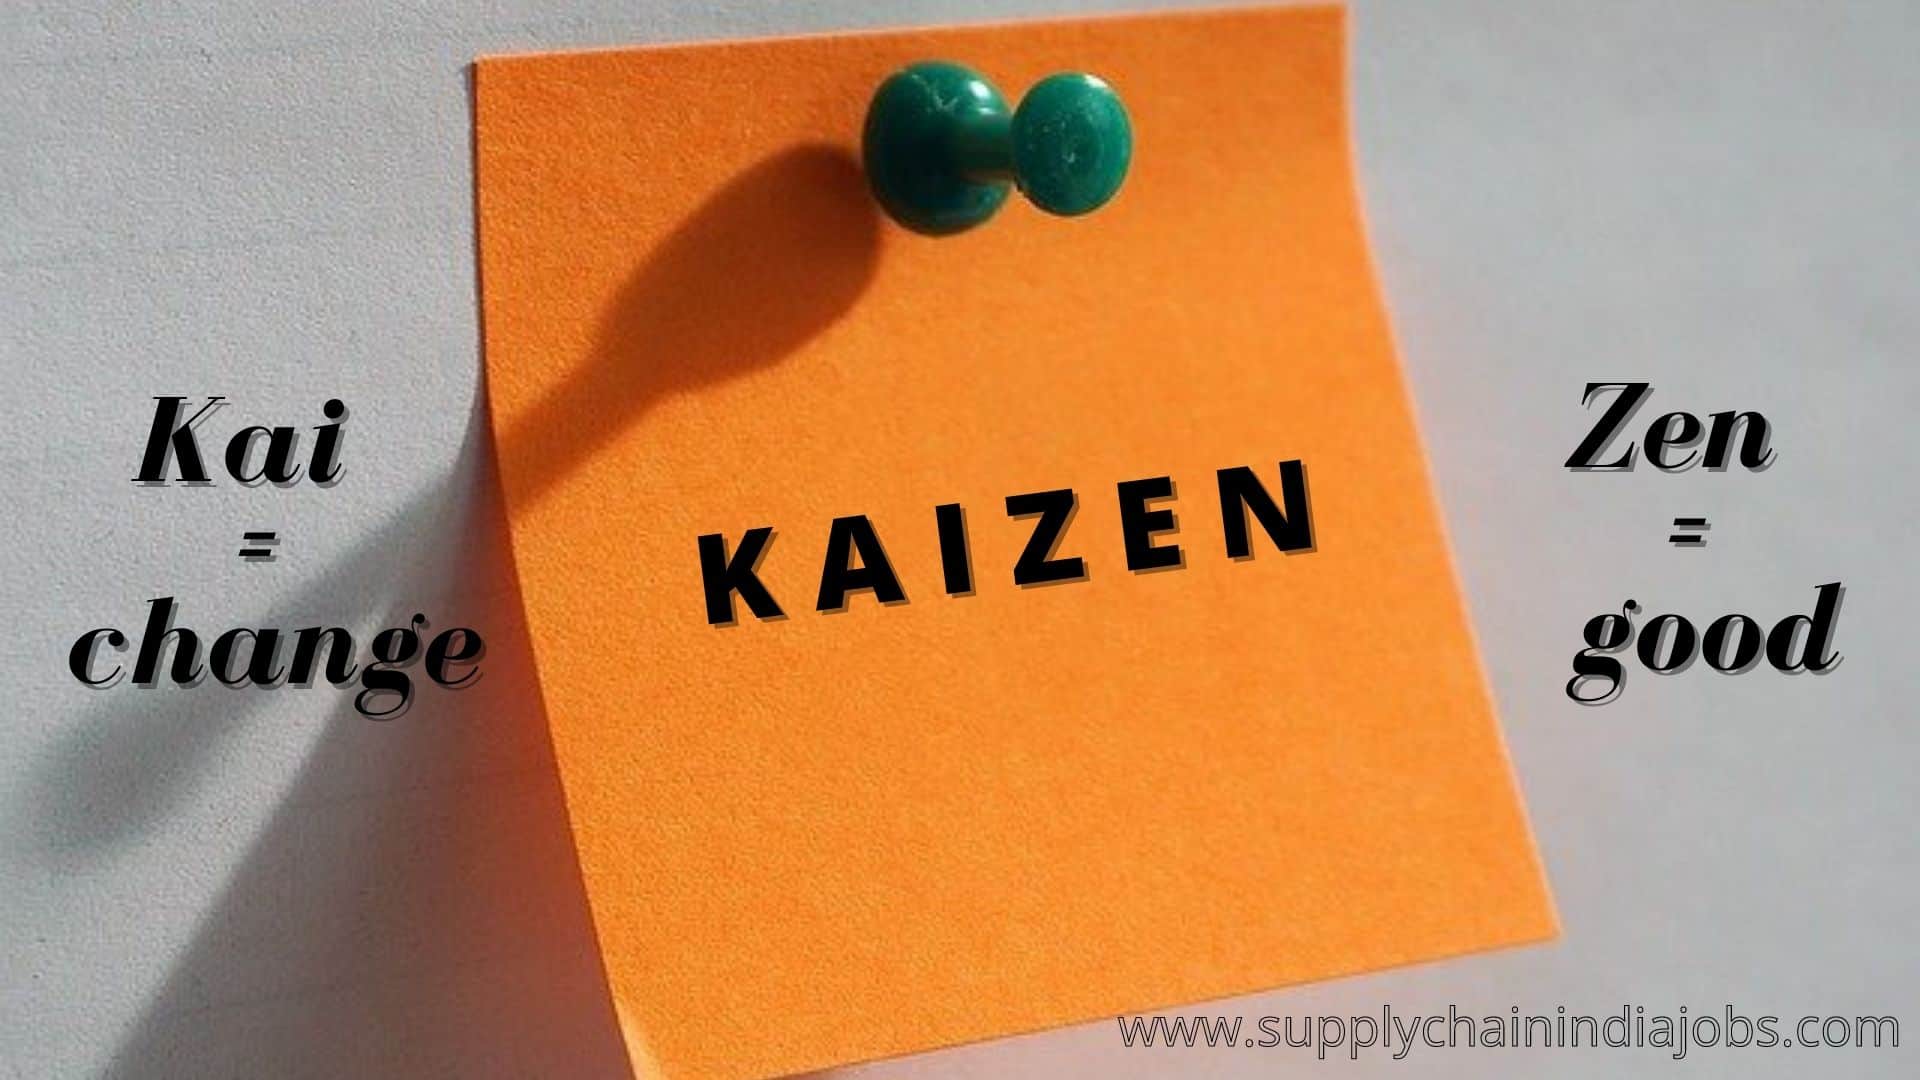 What Is Kaizen?